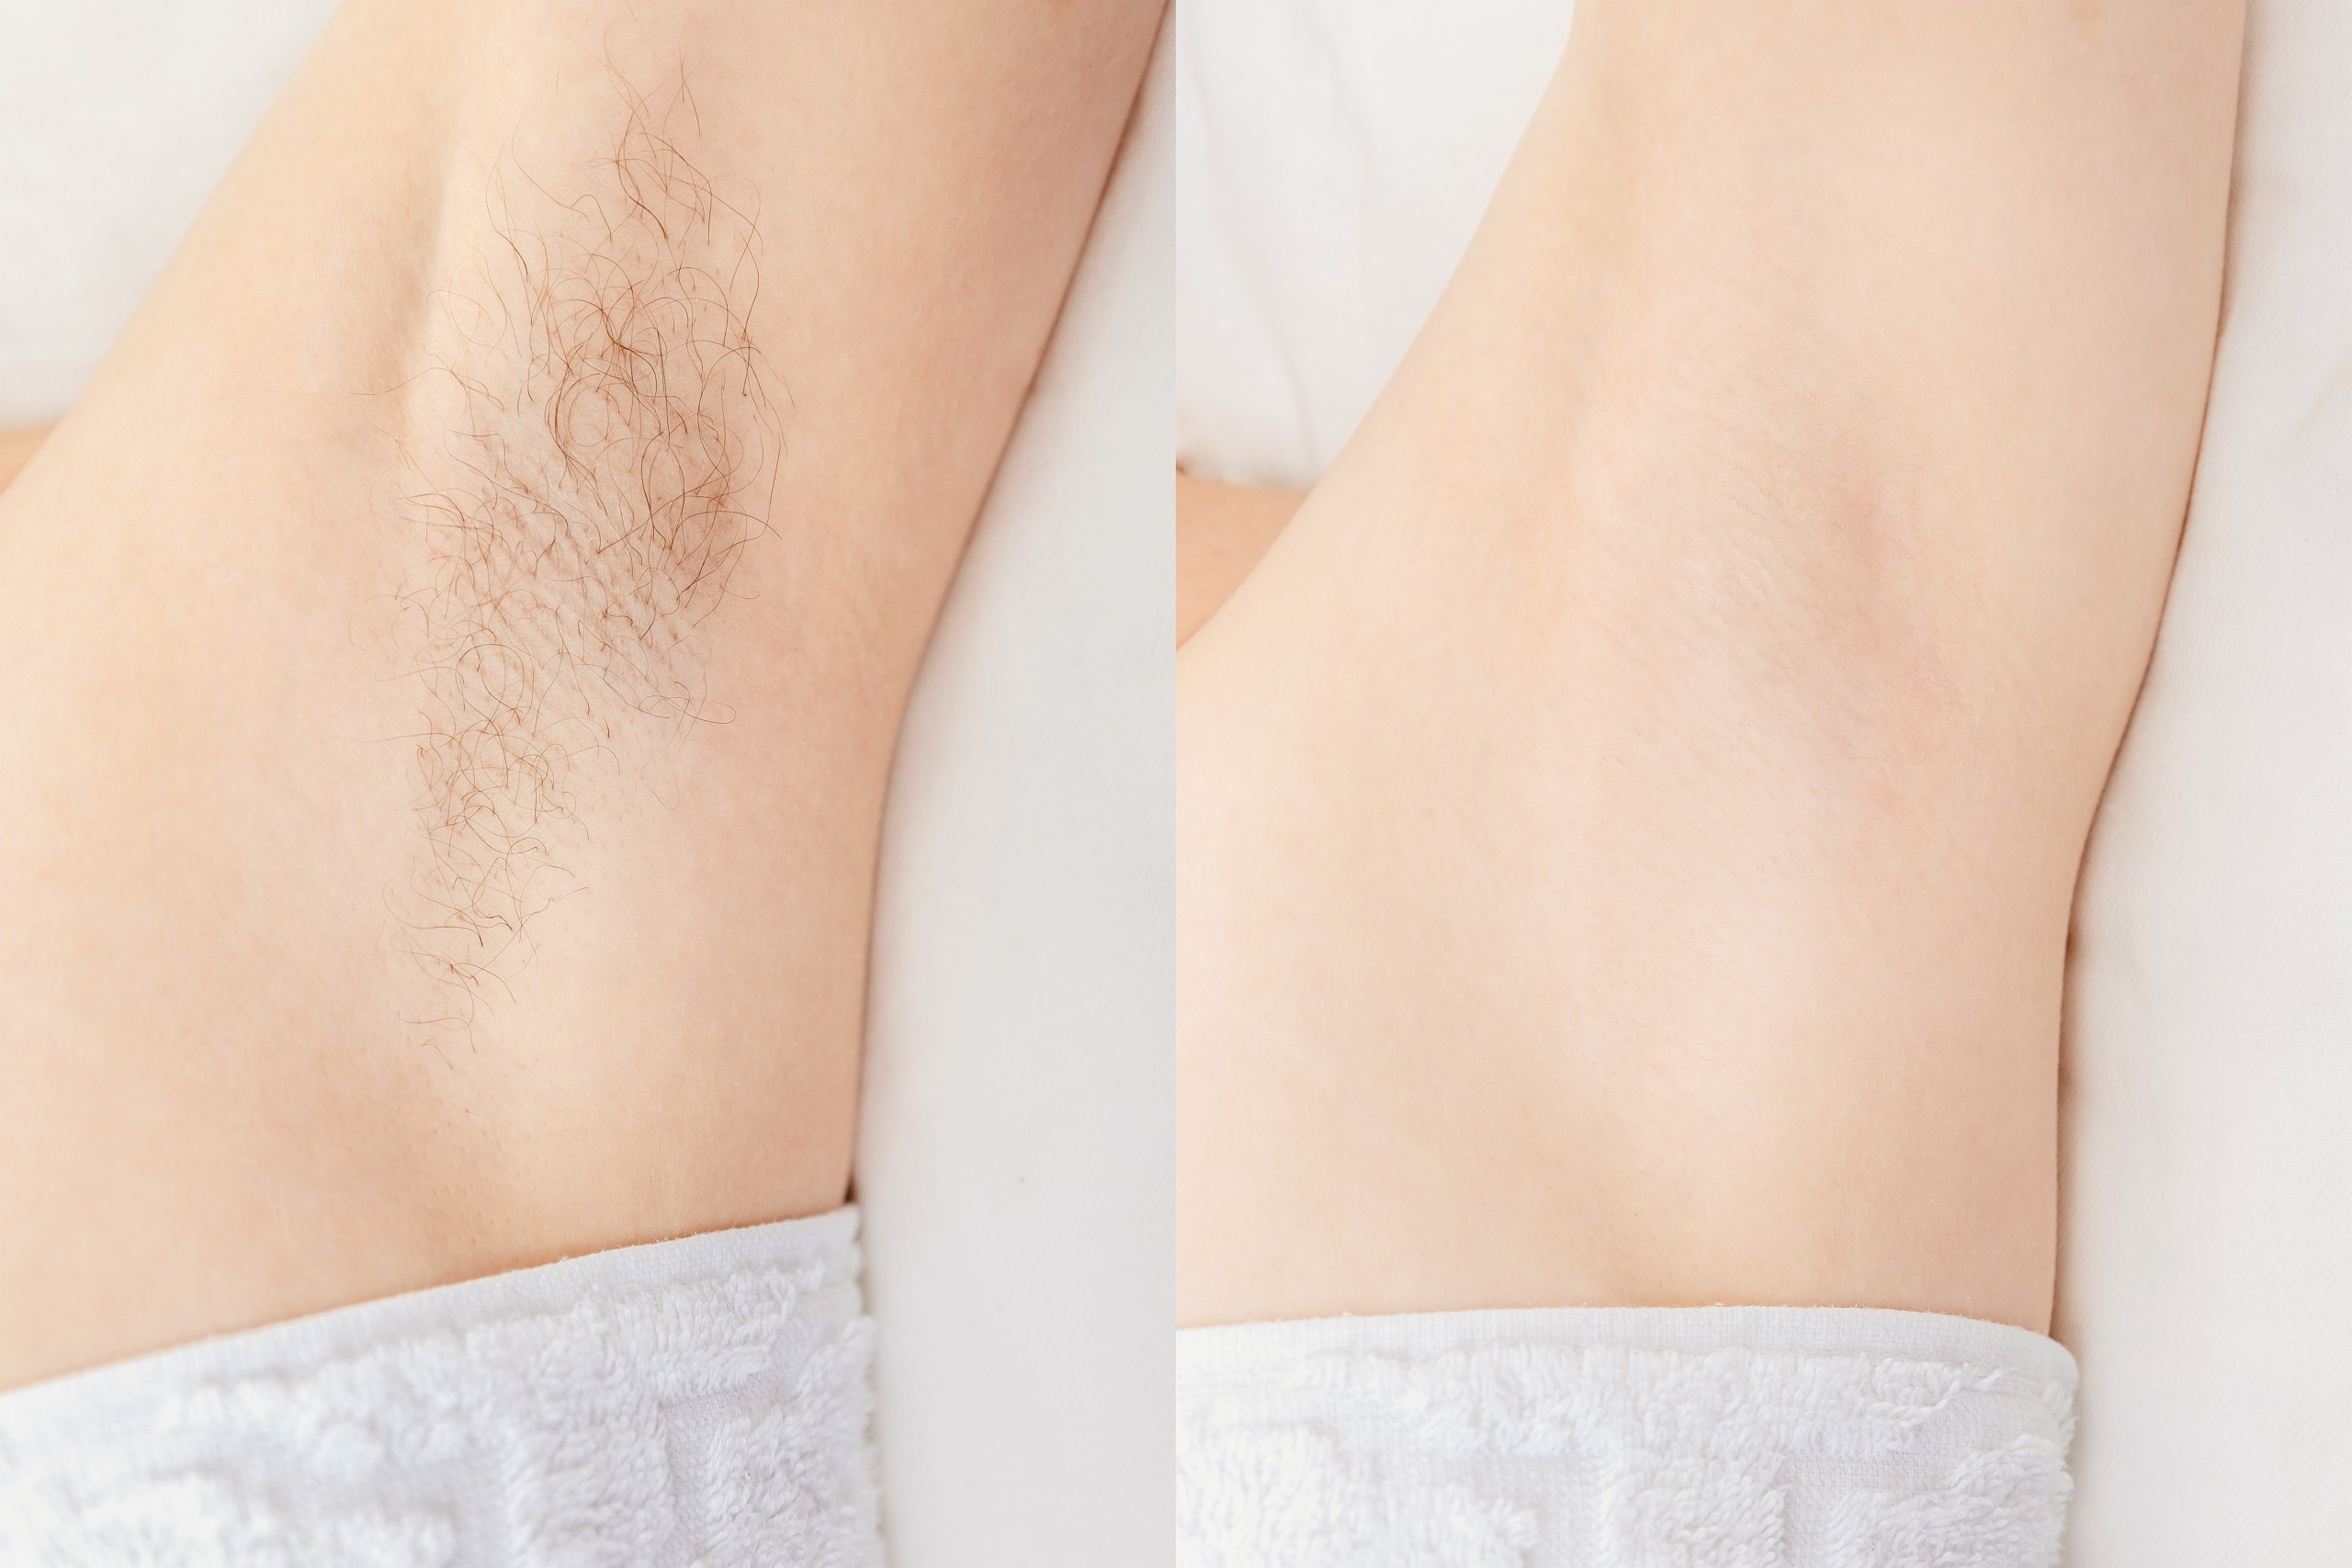 Excess/Unwanted Hair